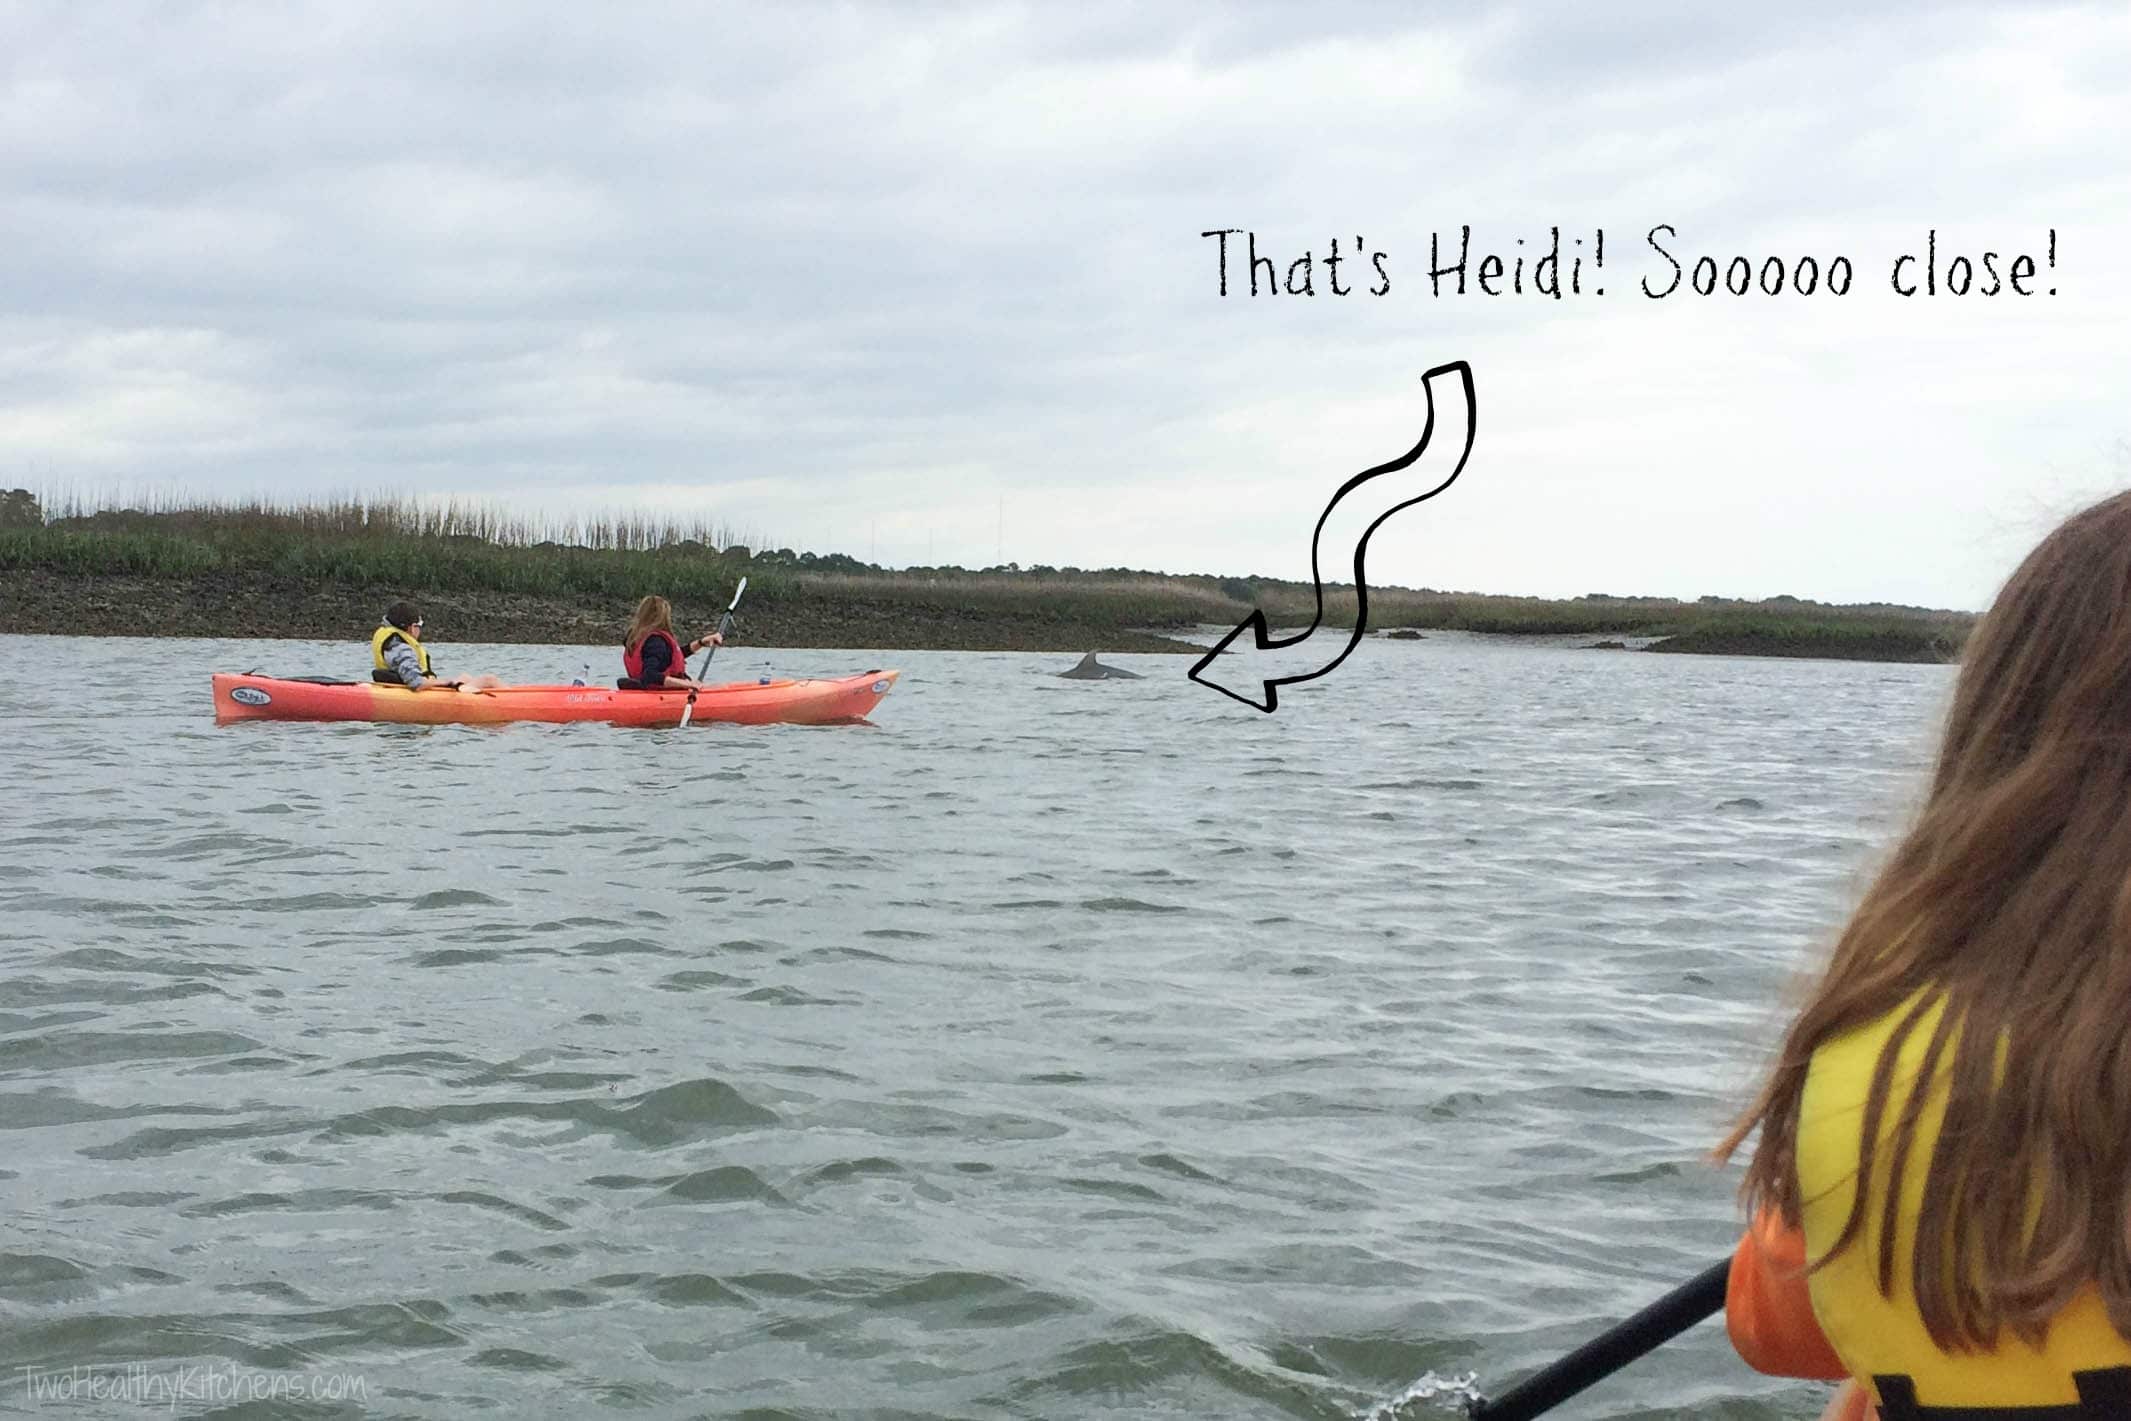 Kayaks in river with dolphin fin and text overlay with arrow "That's Heidi! Sooooo close!".